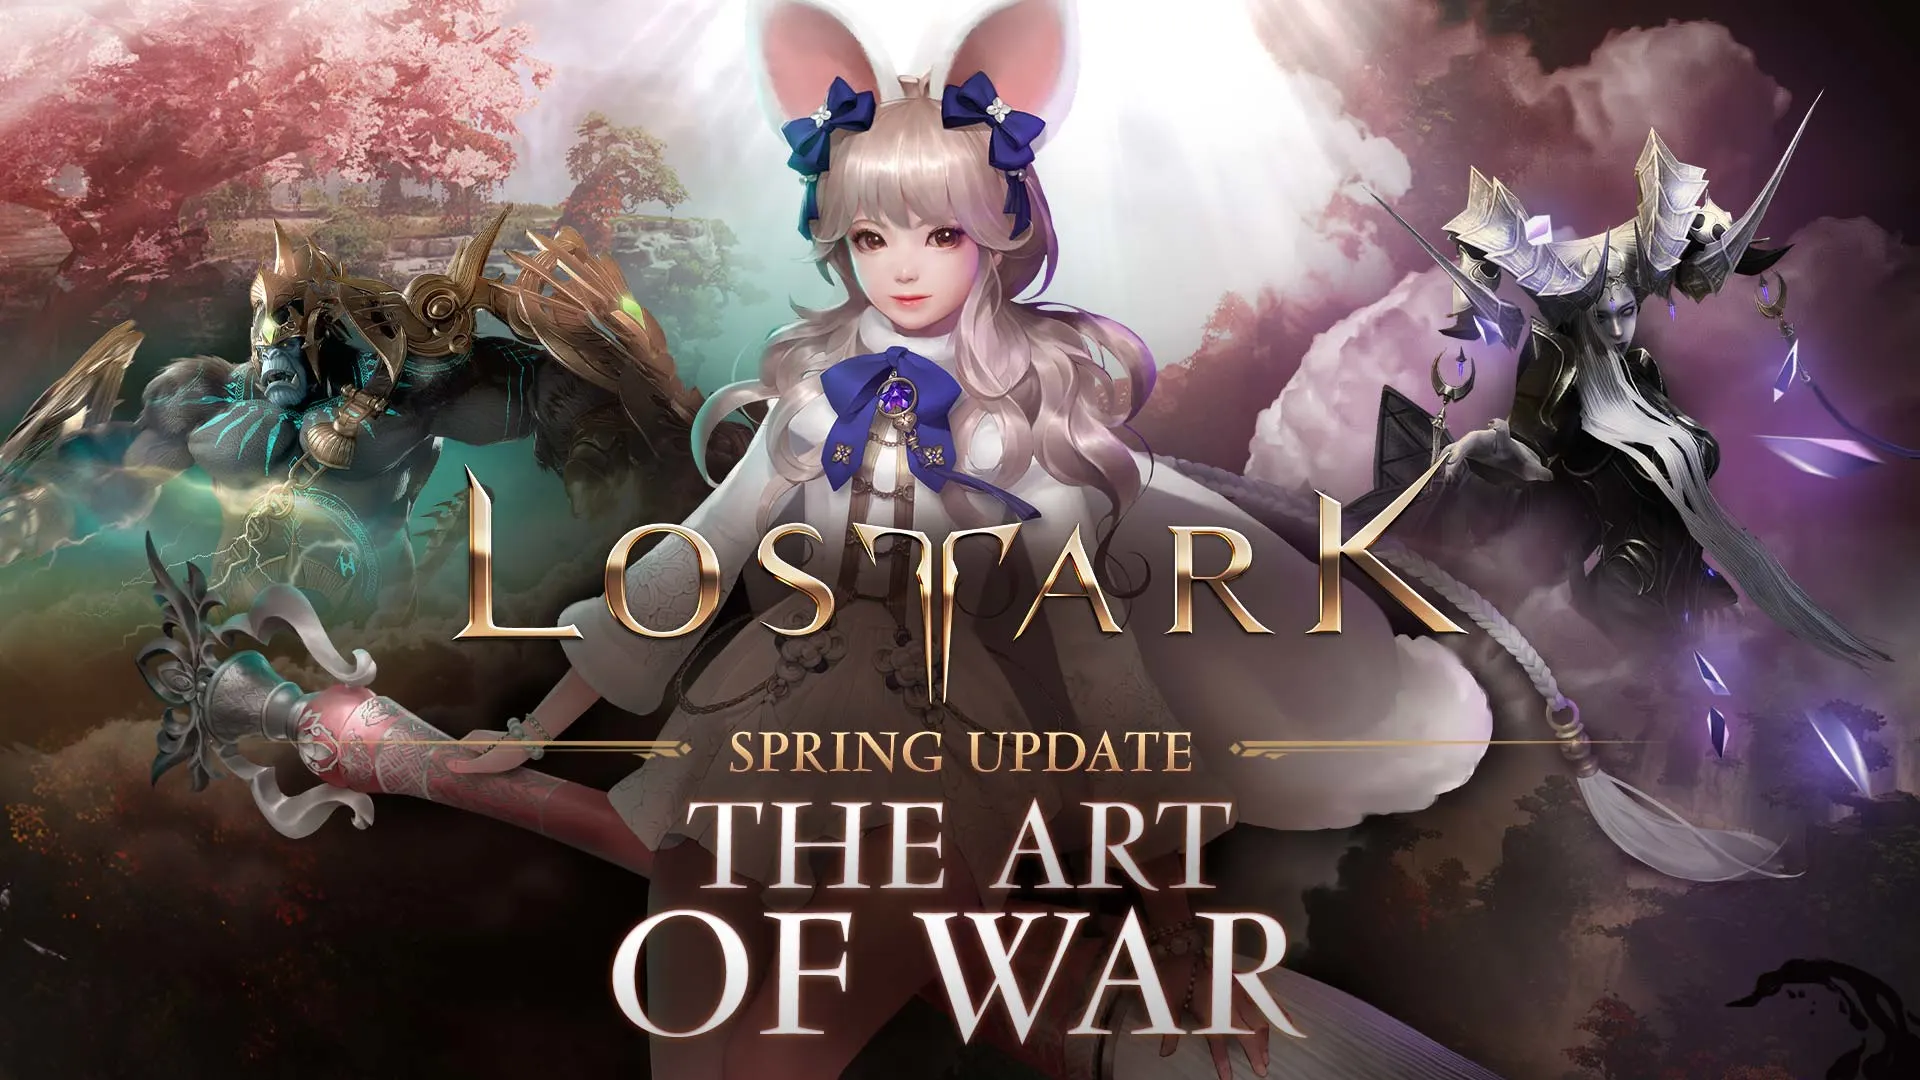 Lost Ark x The Witcher Release Notes - News